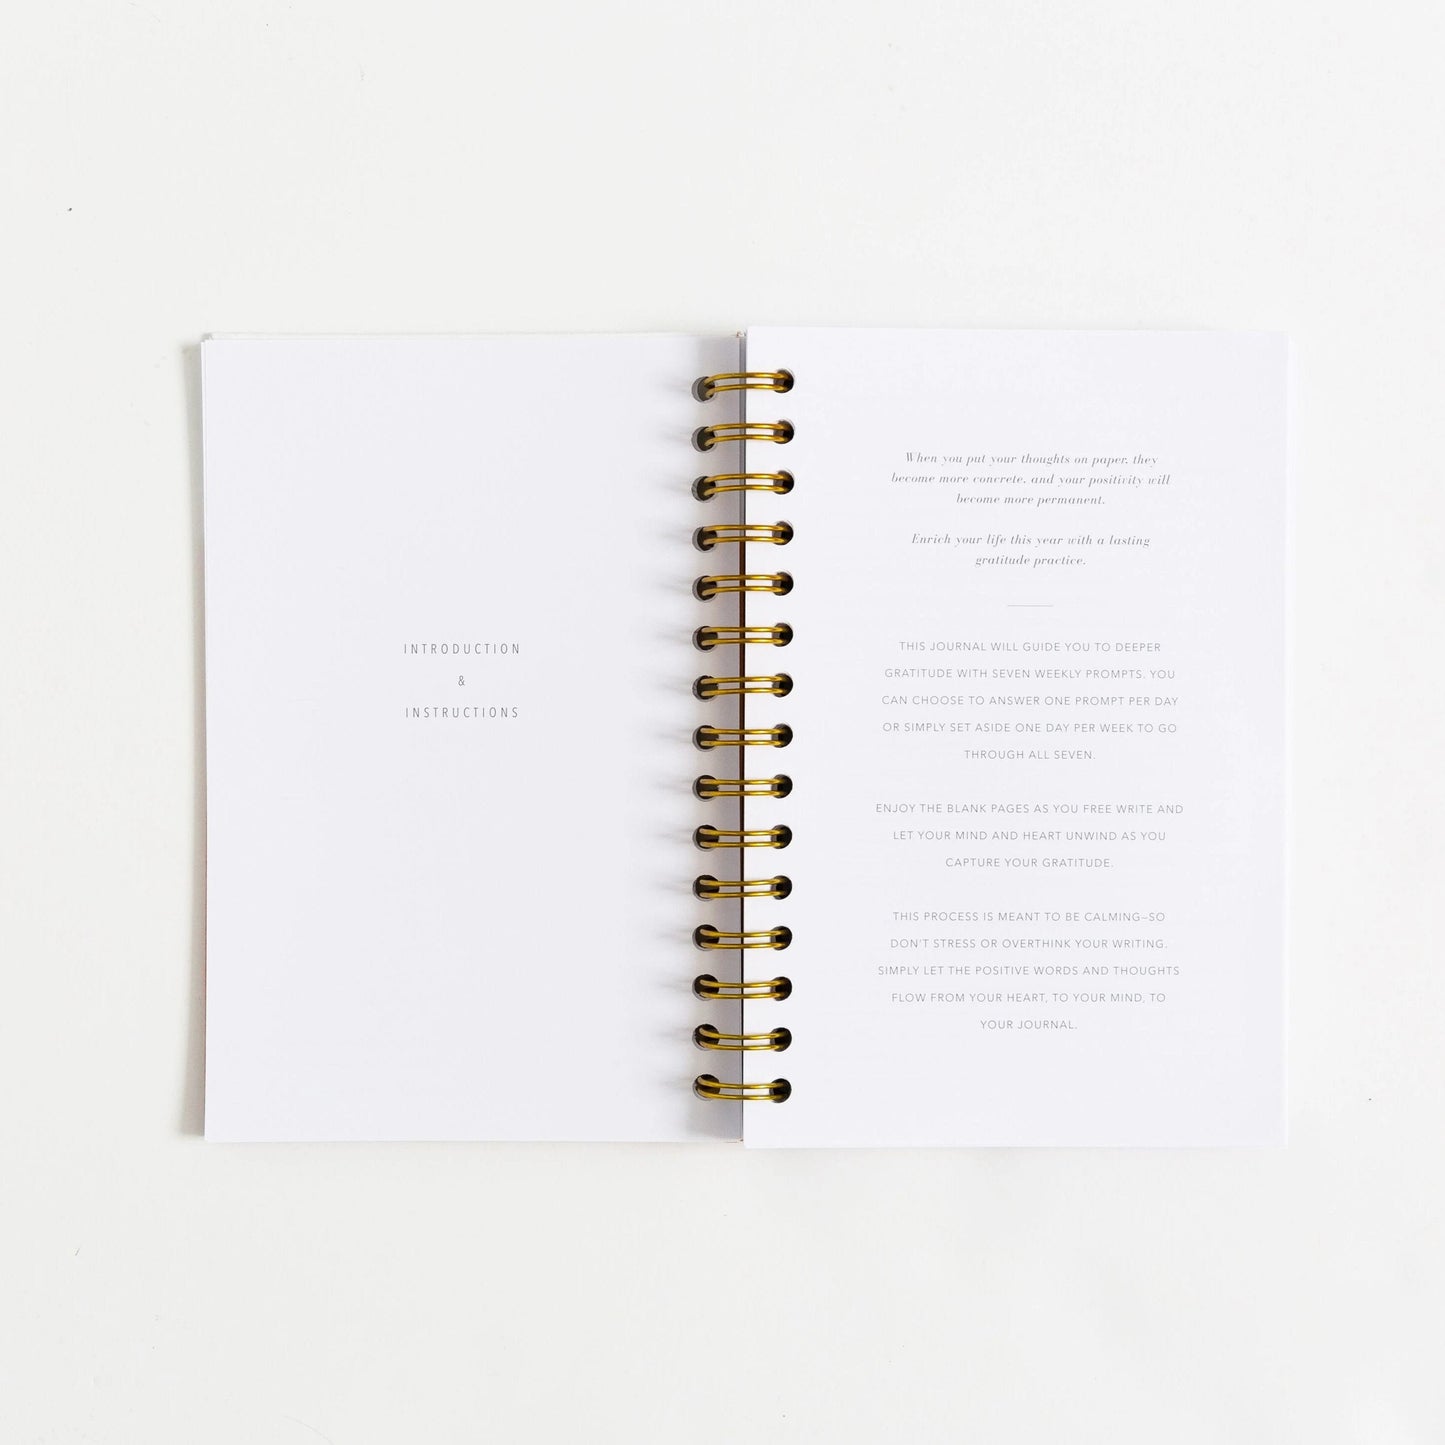 Gratitude Journals - Dusty Rose by Promptly Journals